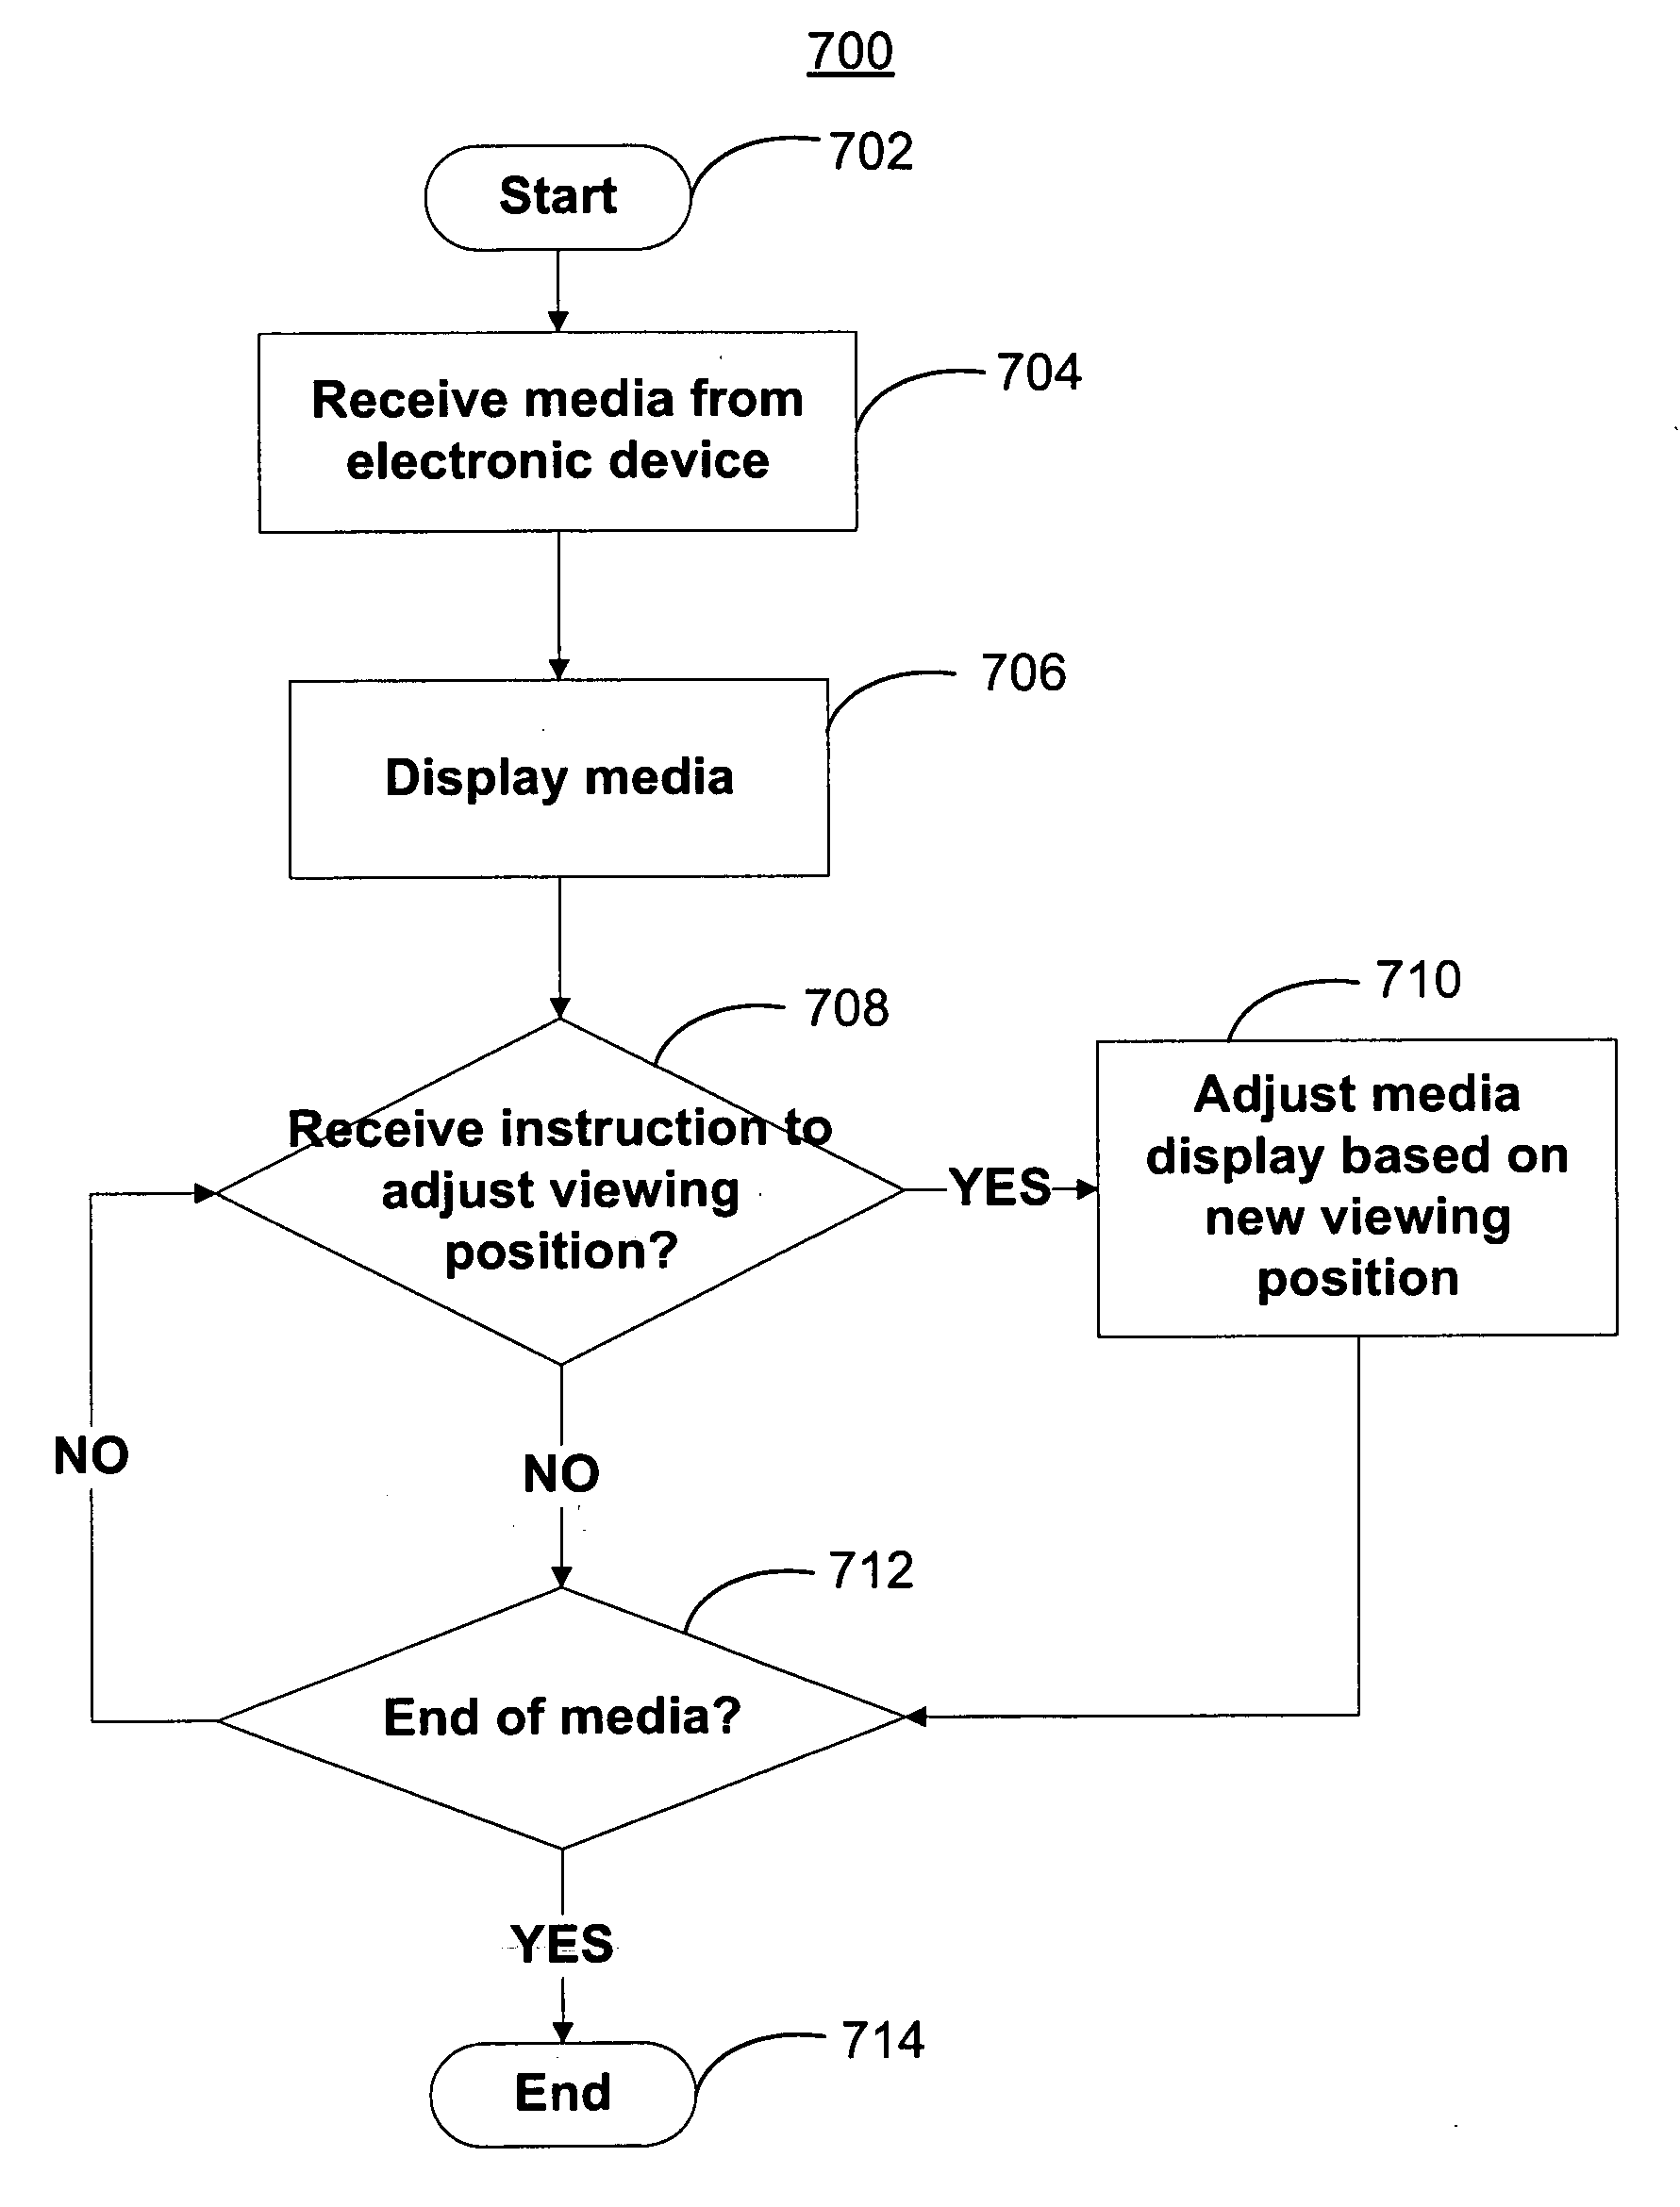 Automatically adjusting media display in a personal display system